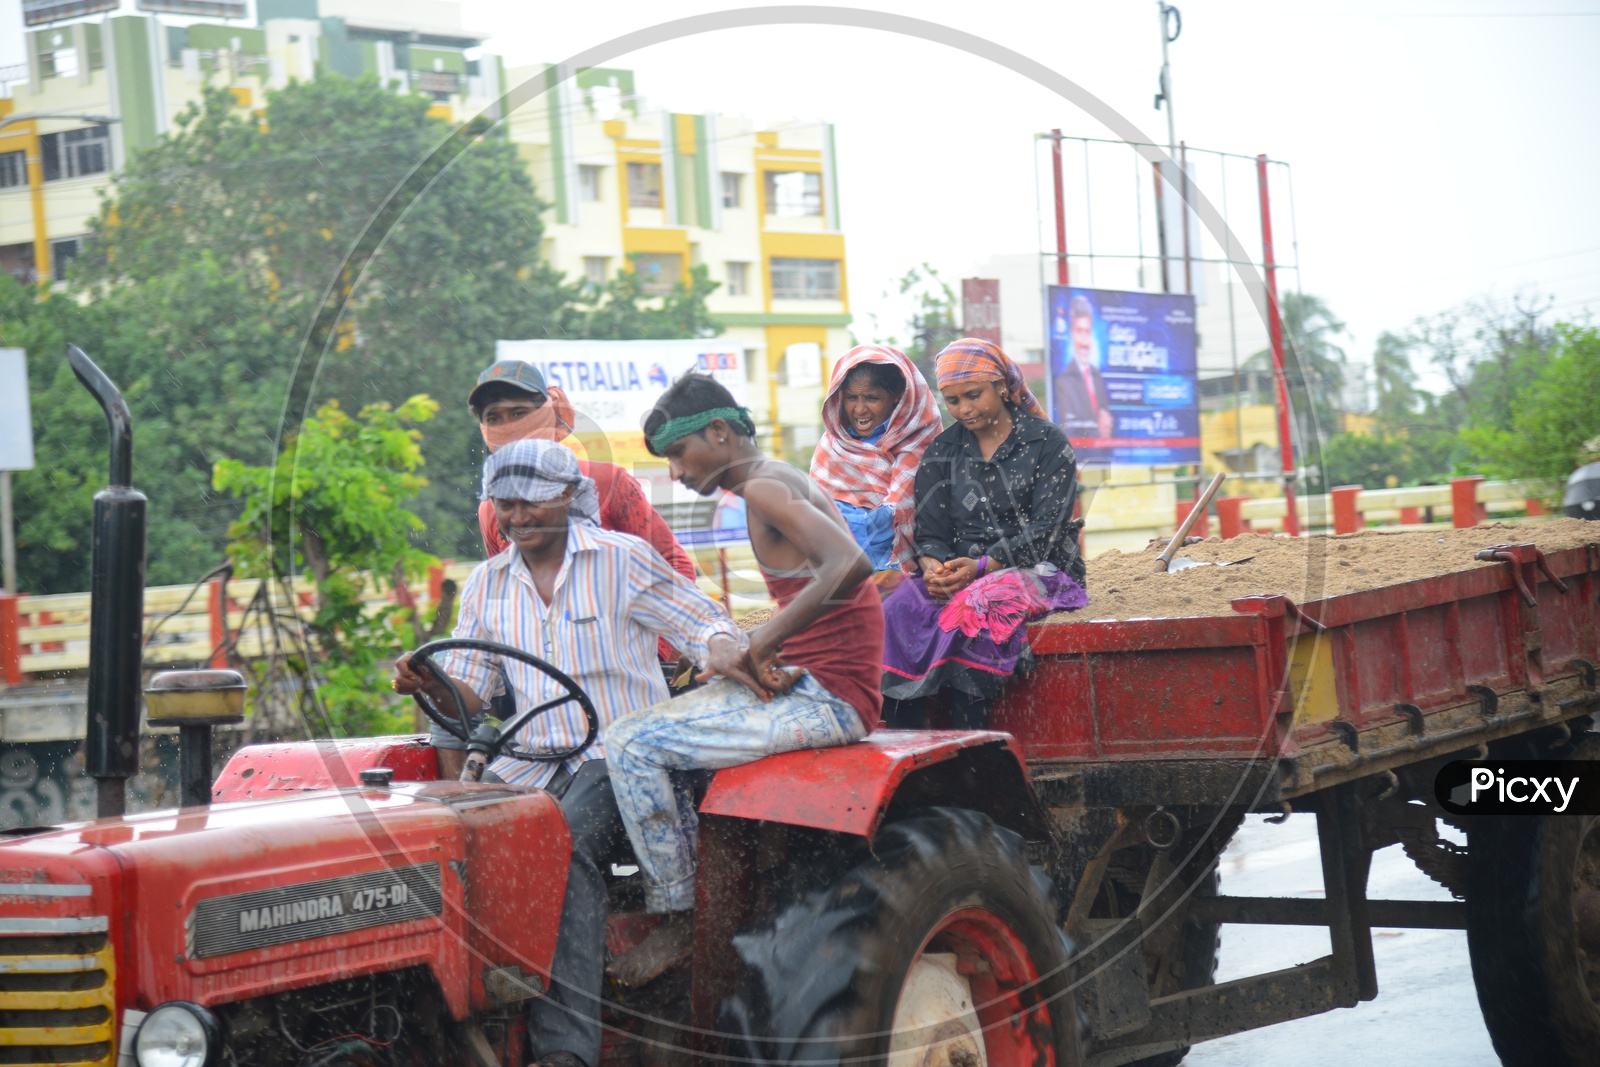 A tractor with sand trolley on road during rain